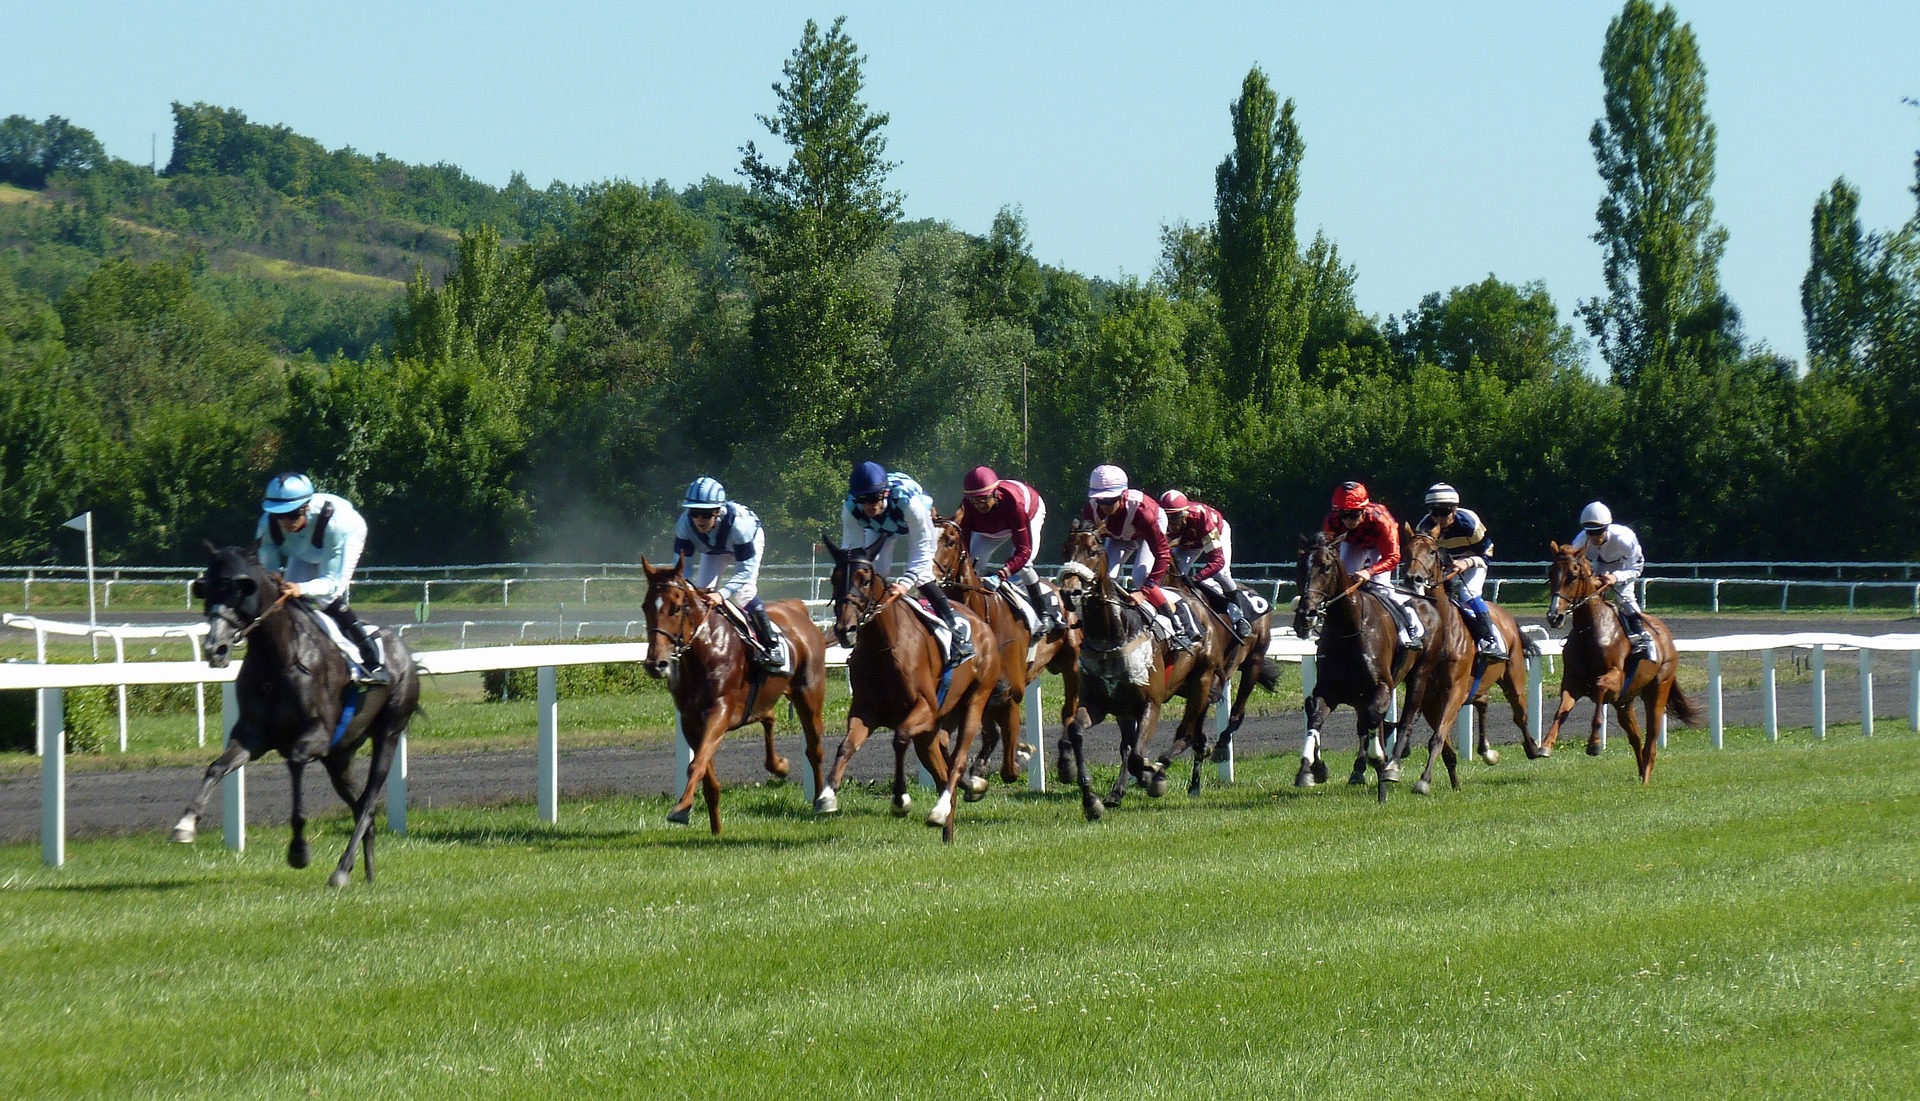 Horses are running on grassy race track.